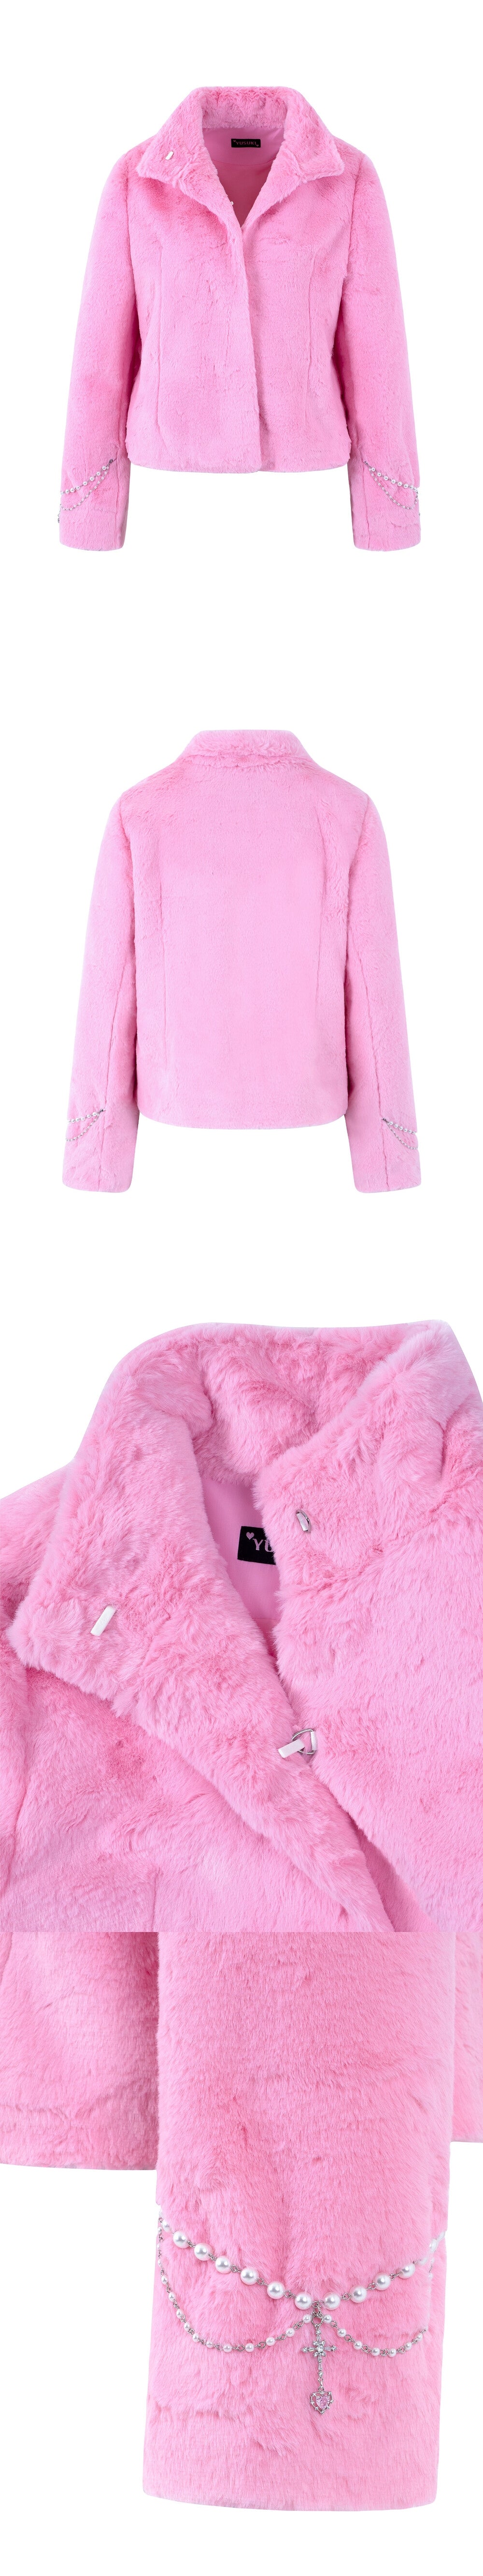 Faux Fur Jacket with Chains (Pink)